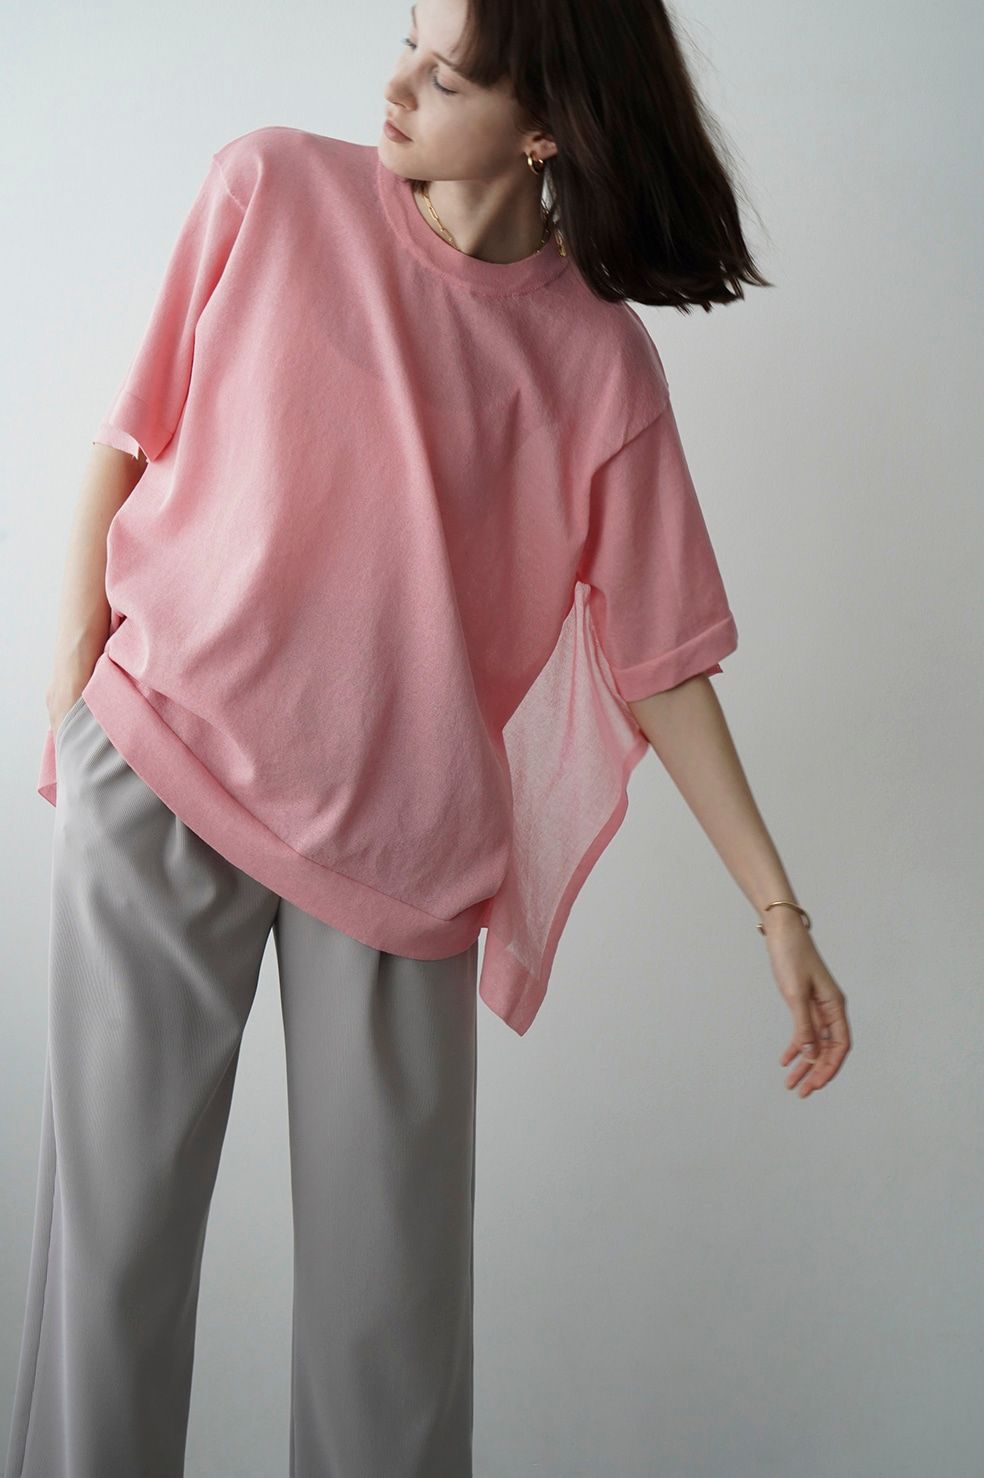 CLANE - シアー スクエア ニット トップス - SHEER SQUARE KNIT TOPS 